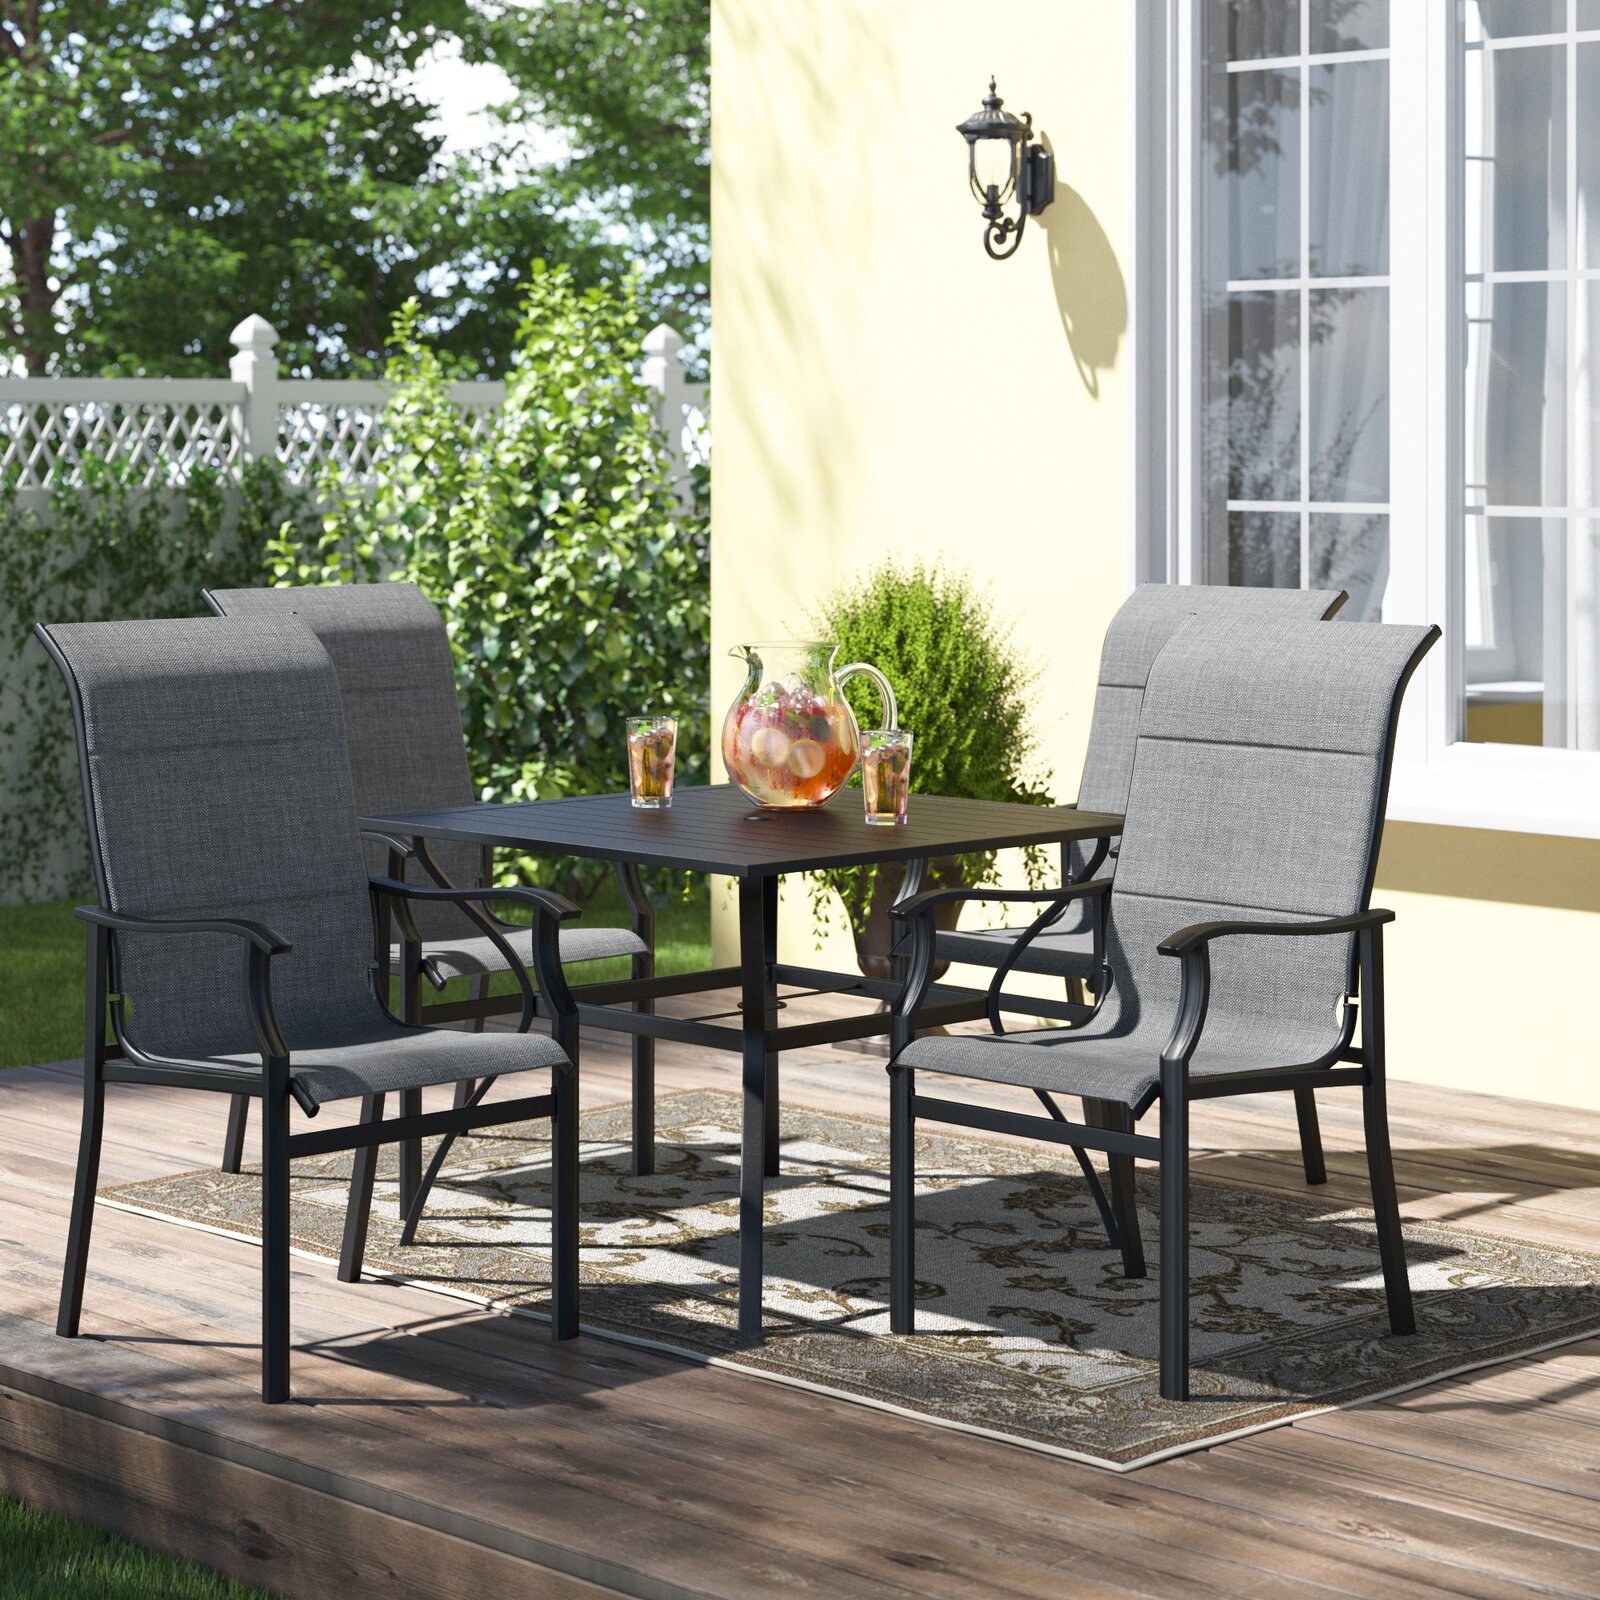 Lark Manor Milnor Square 4 - Person Outdoor Dining Set & Reviews